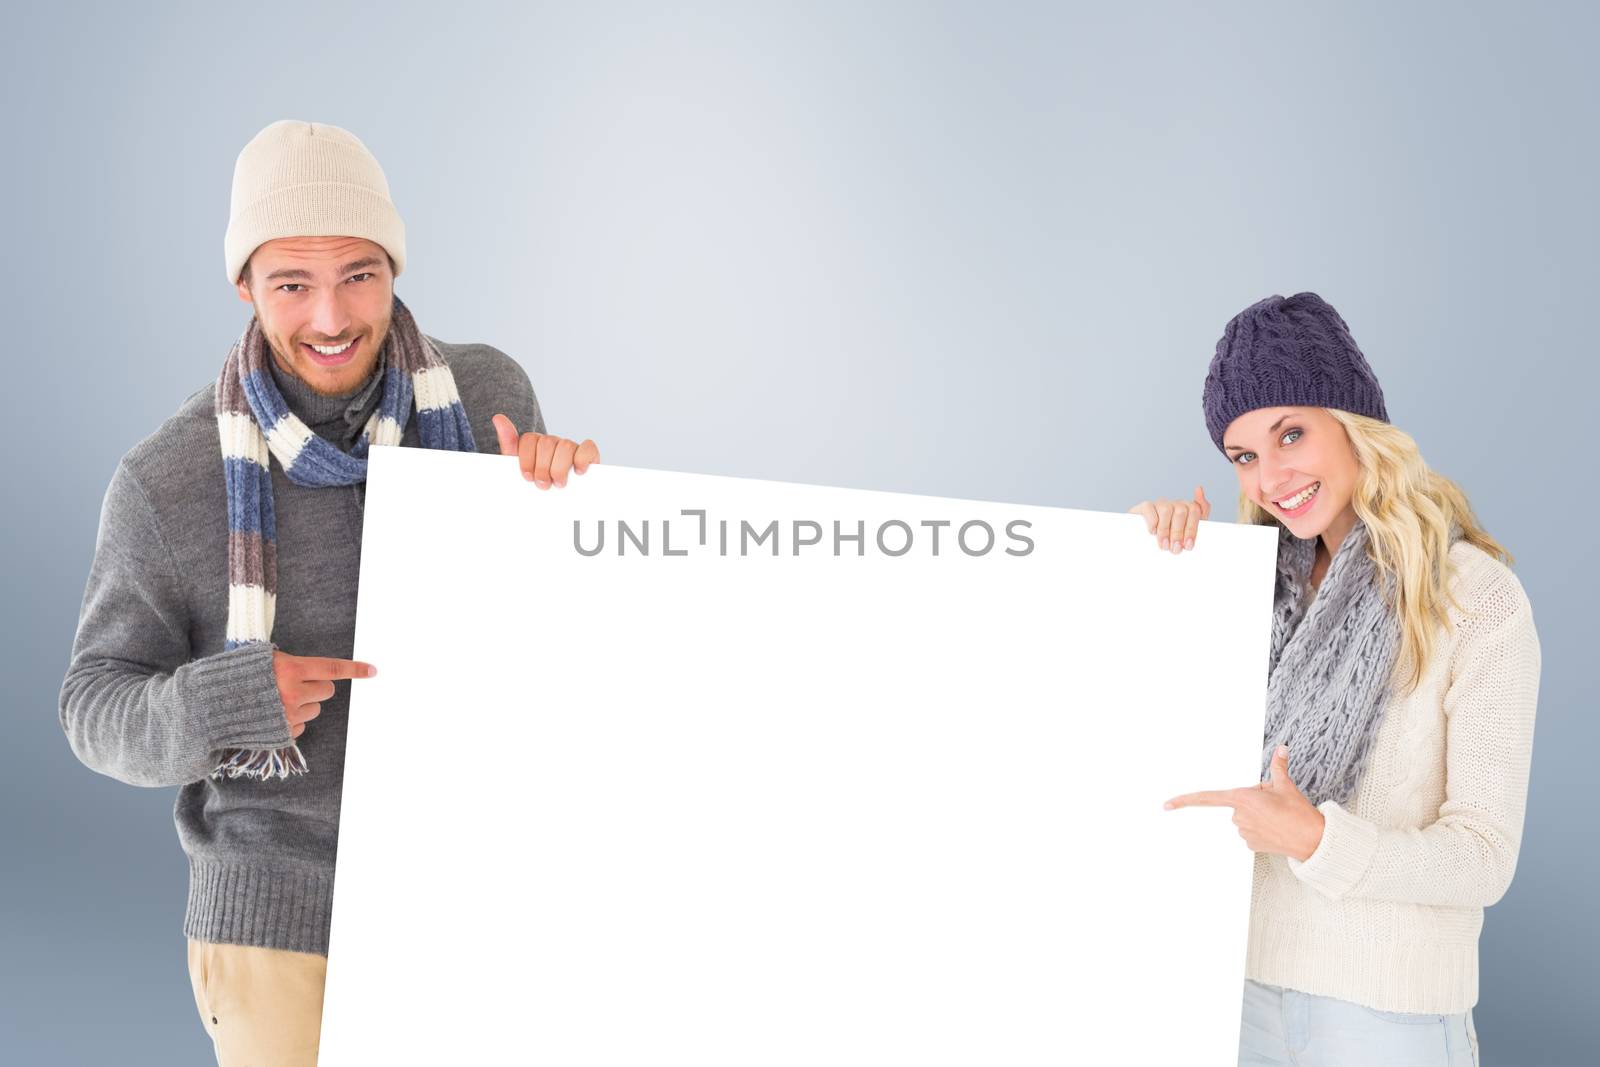 Attractive couple in winter fashion showing poster against grey vignette